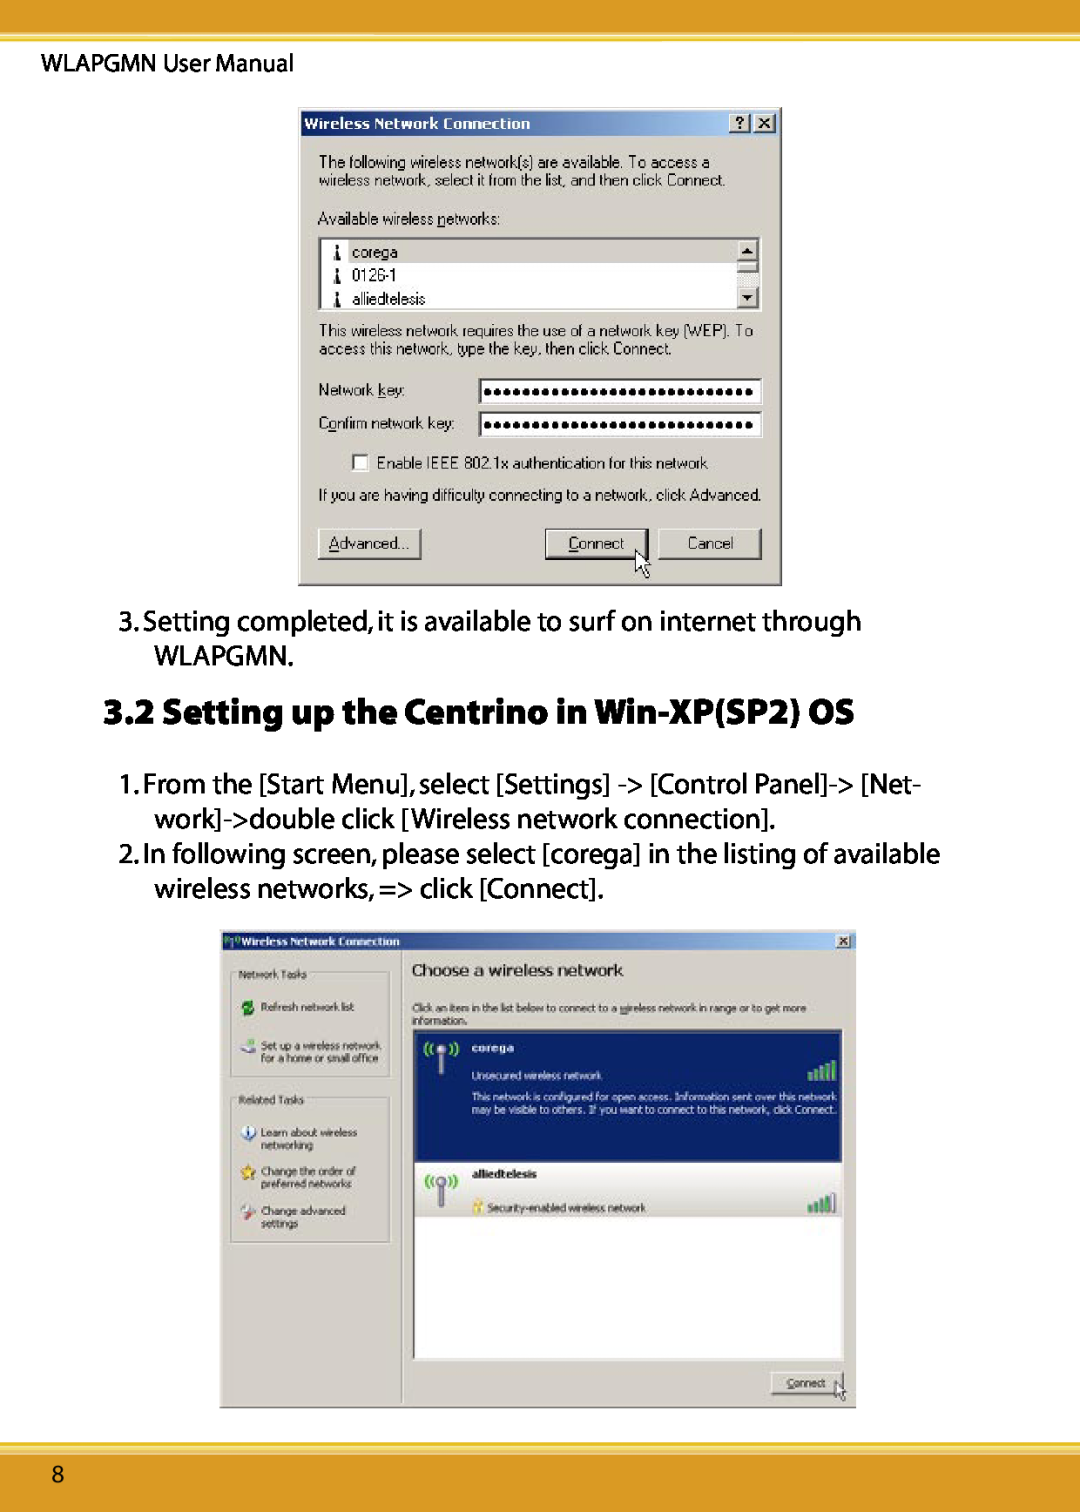 Corega CG-WLAPGMN Setting up the Centrino in Win-XPSP2 OS, Setting completed, it is available to surf on internet through 